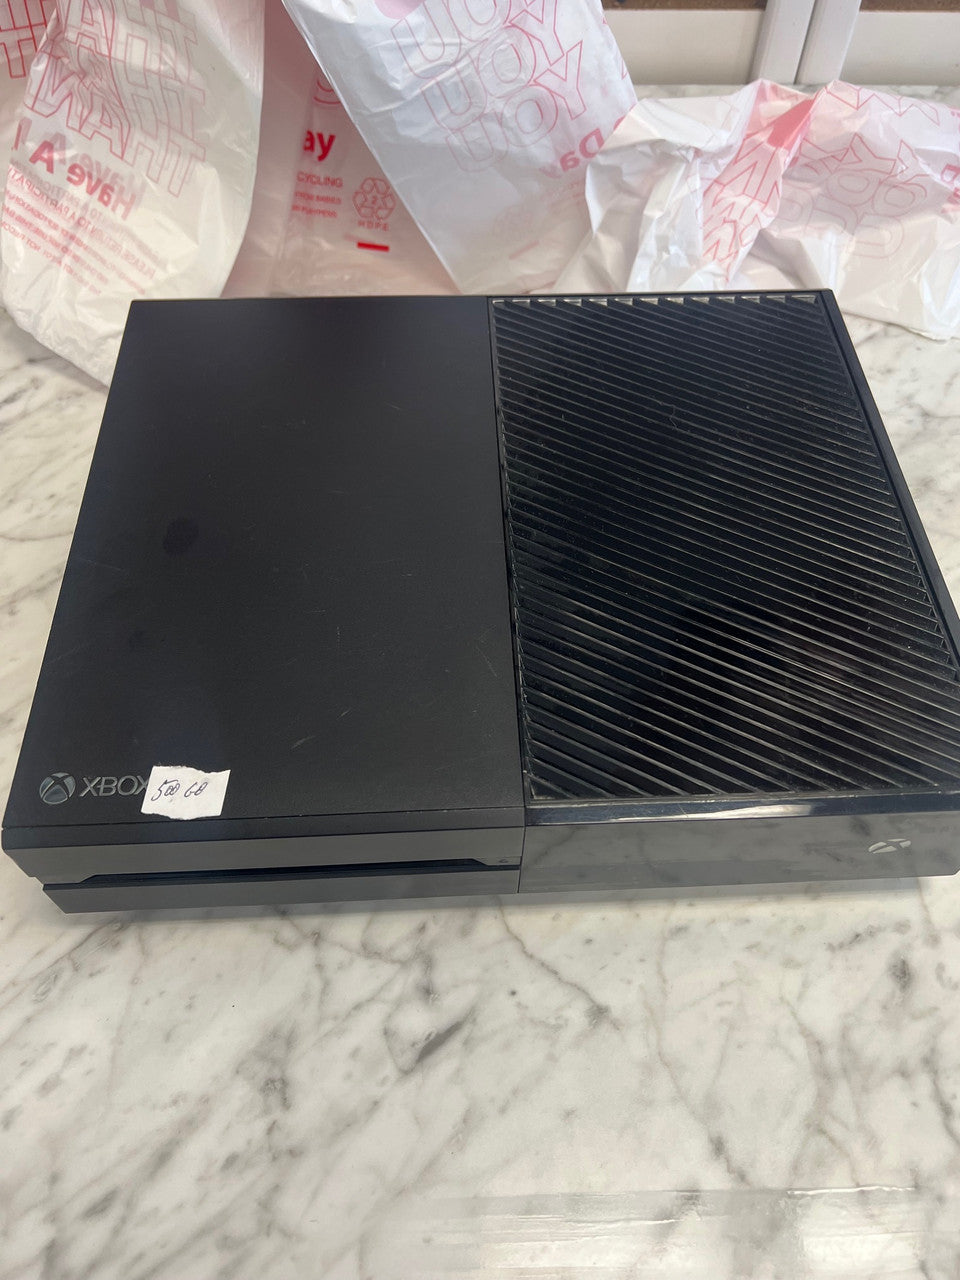 Xbox One (Original version, 500GB) Tested and working no cords or controllers